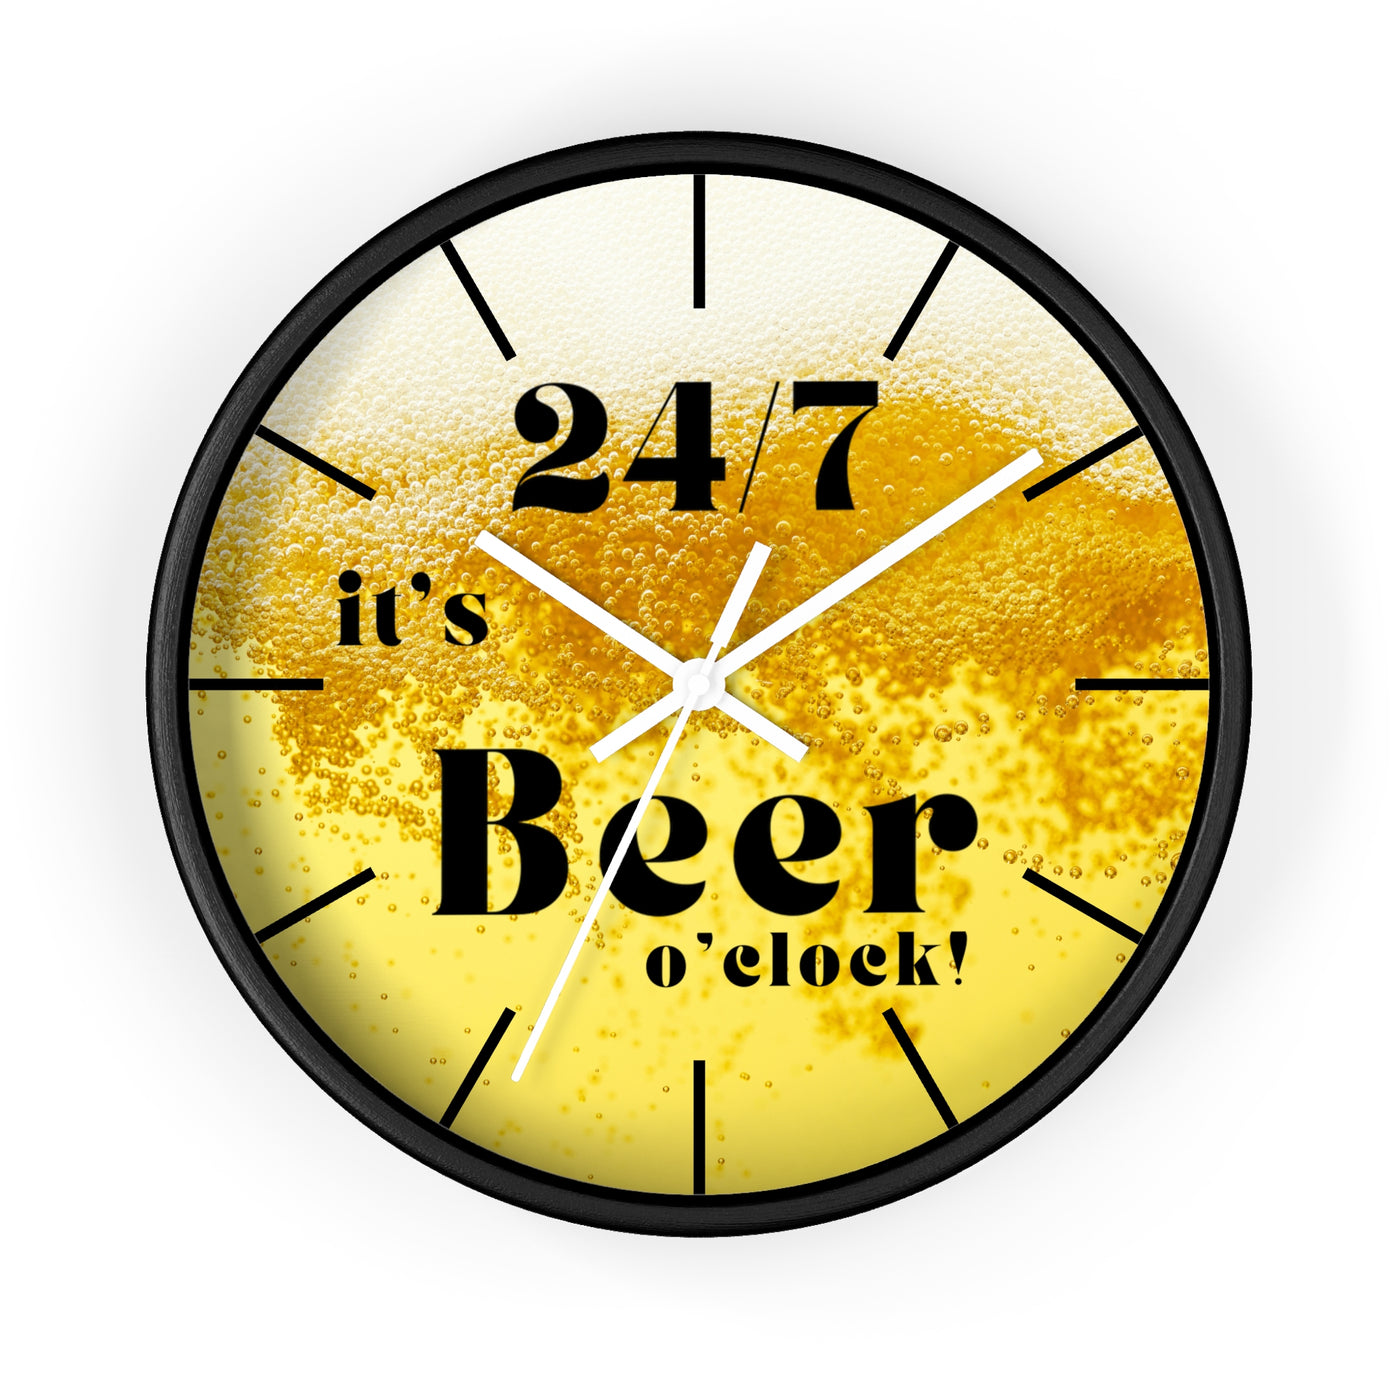 24/7 IT's BEER TIME Wall Clock